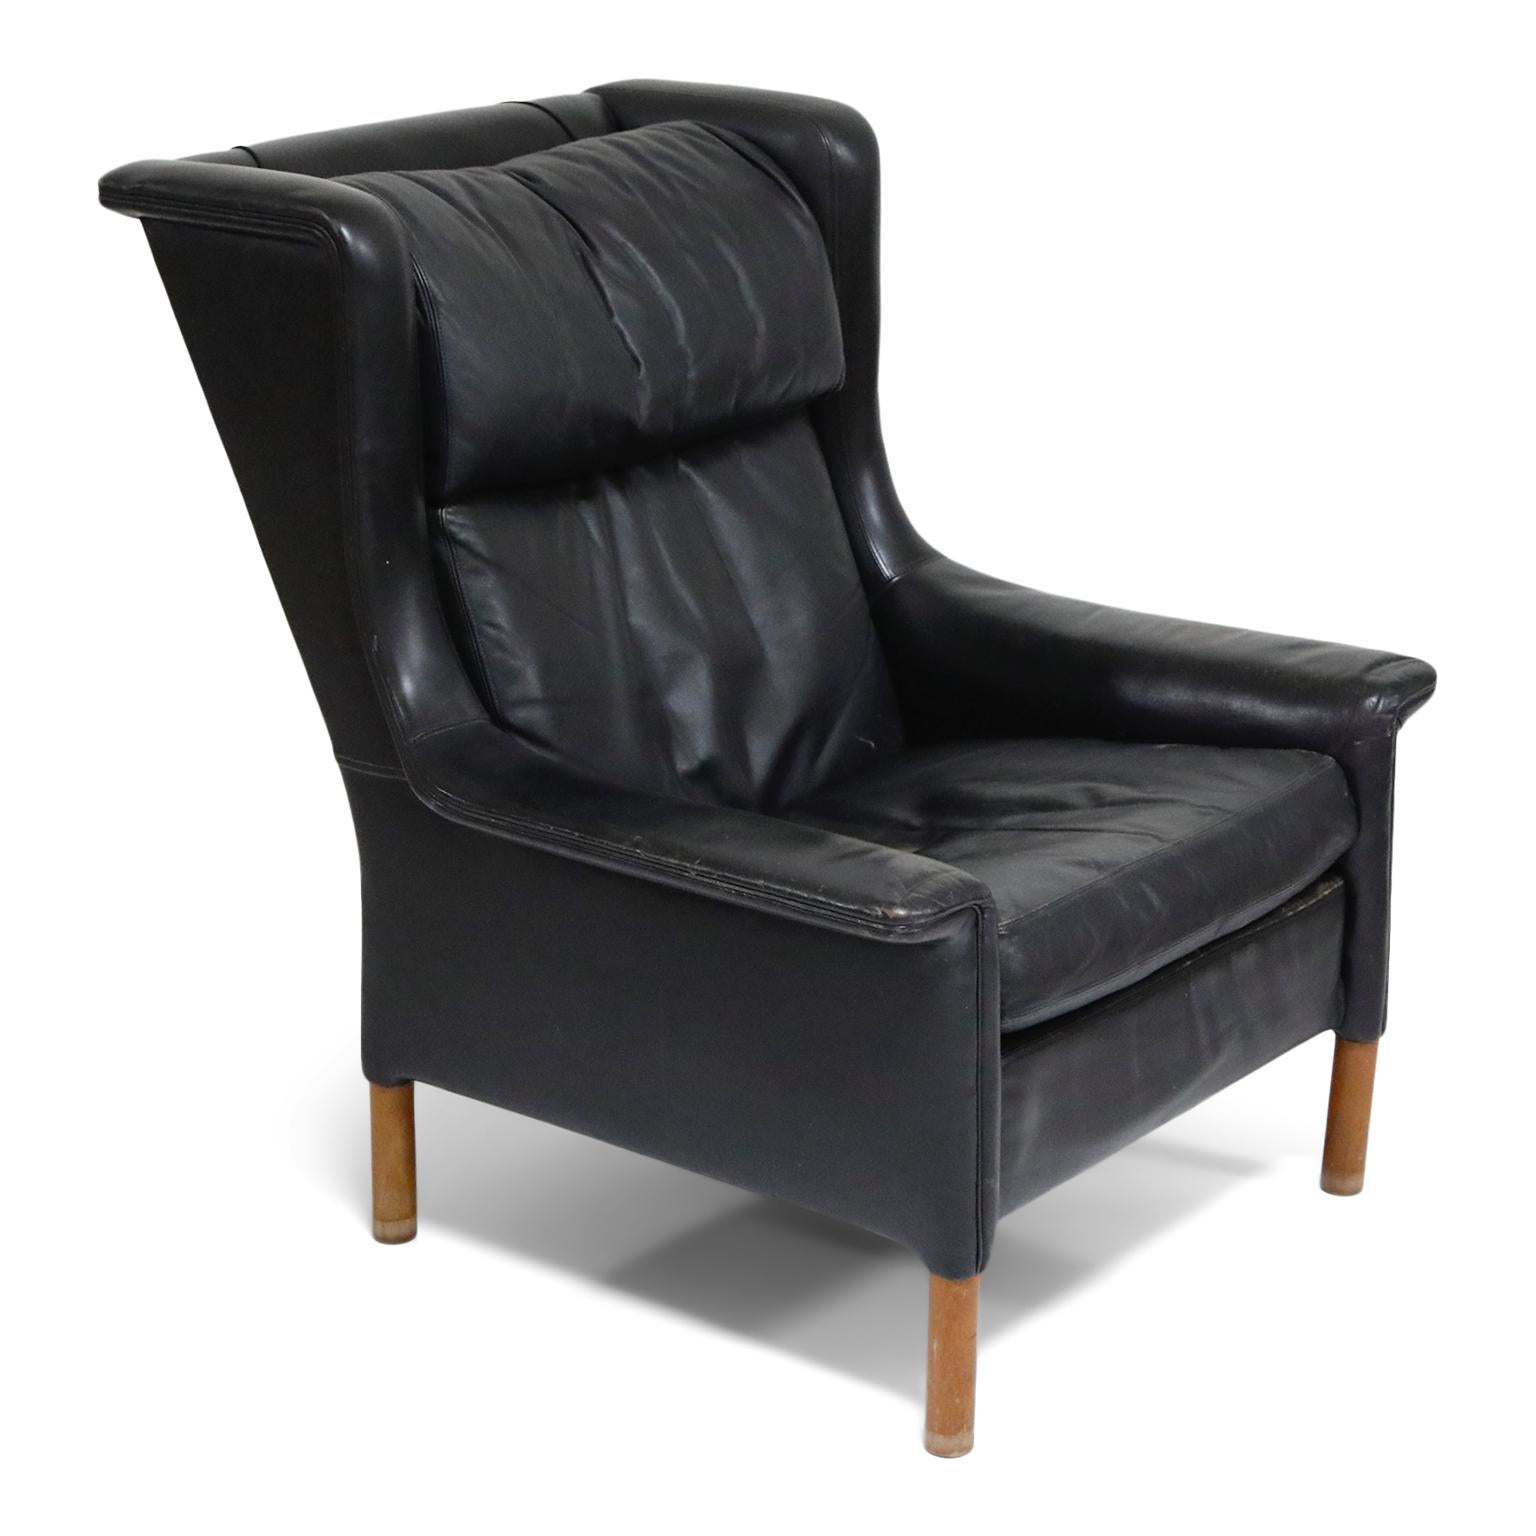 Danish Pair of Black Leather Wingback Chairs and Ottoman by Gerhard Berg, 1965